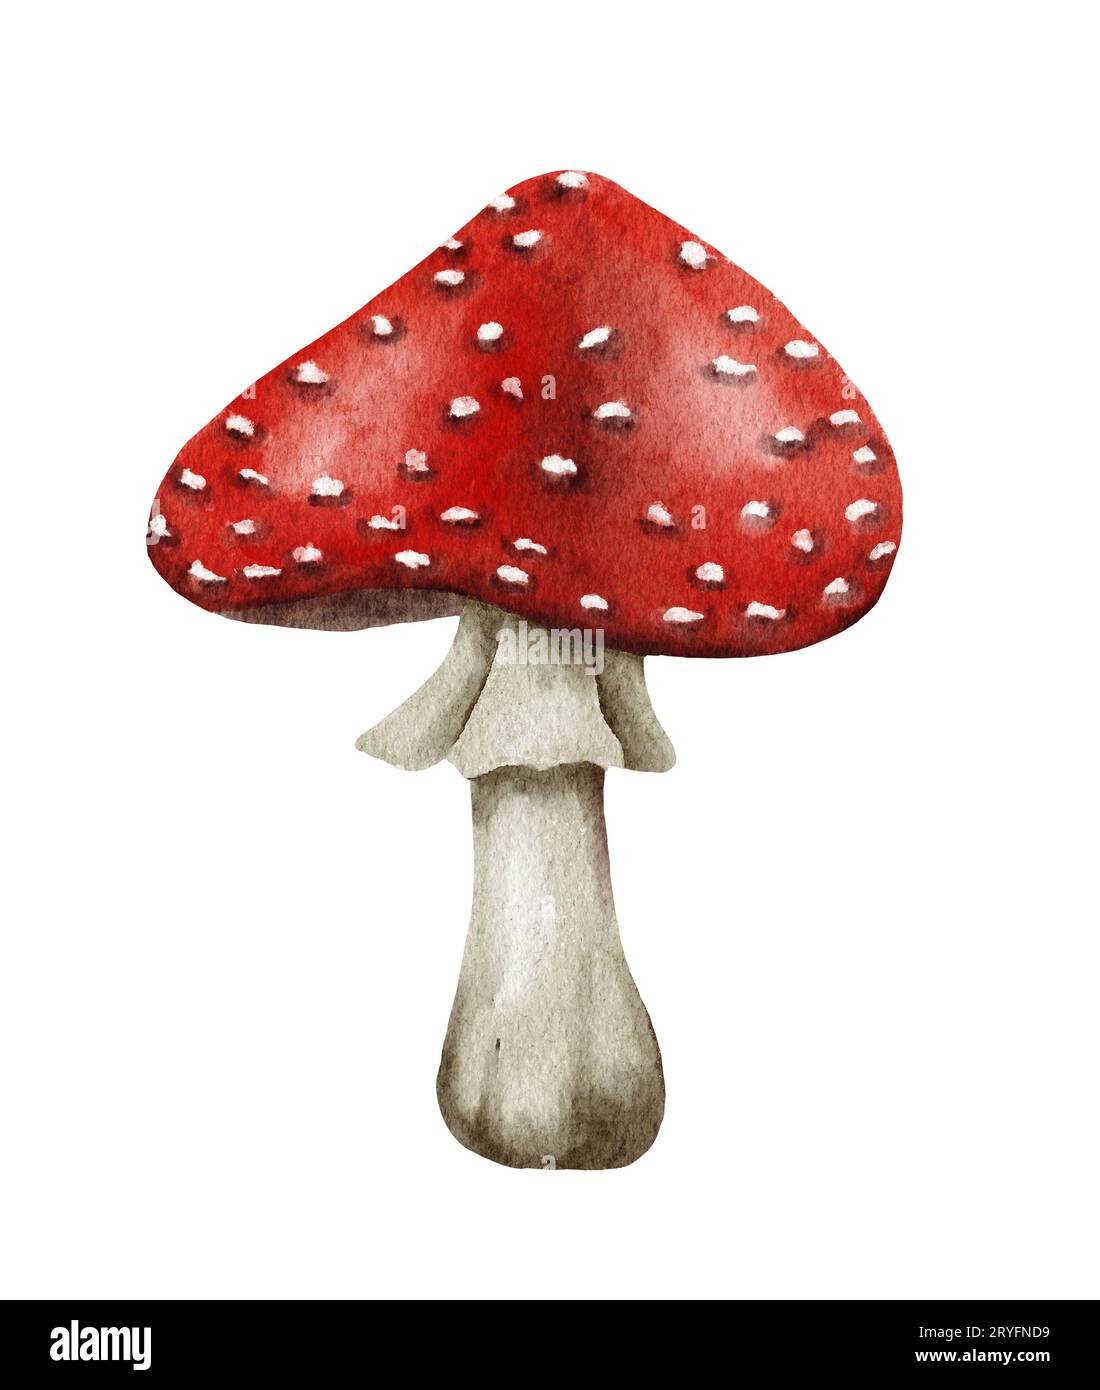 Watercolor dangerous poisonous mushrooms red Amanita muscaria wild fungus fungi from autumn fall forest woodland natural season Stock Photo